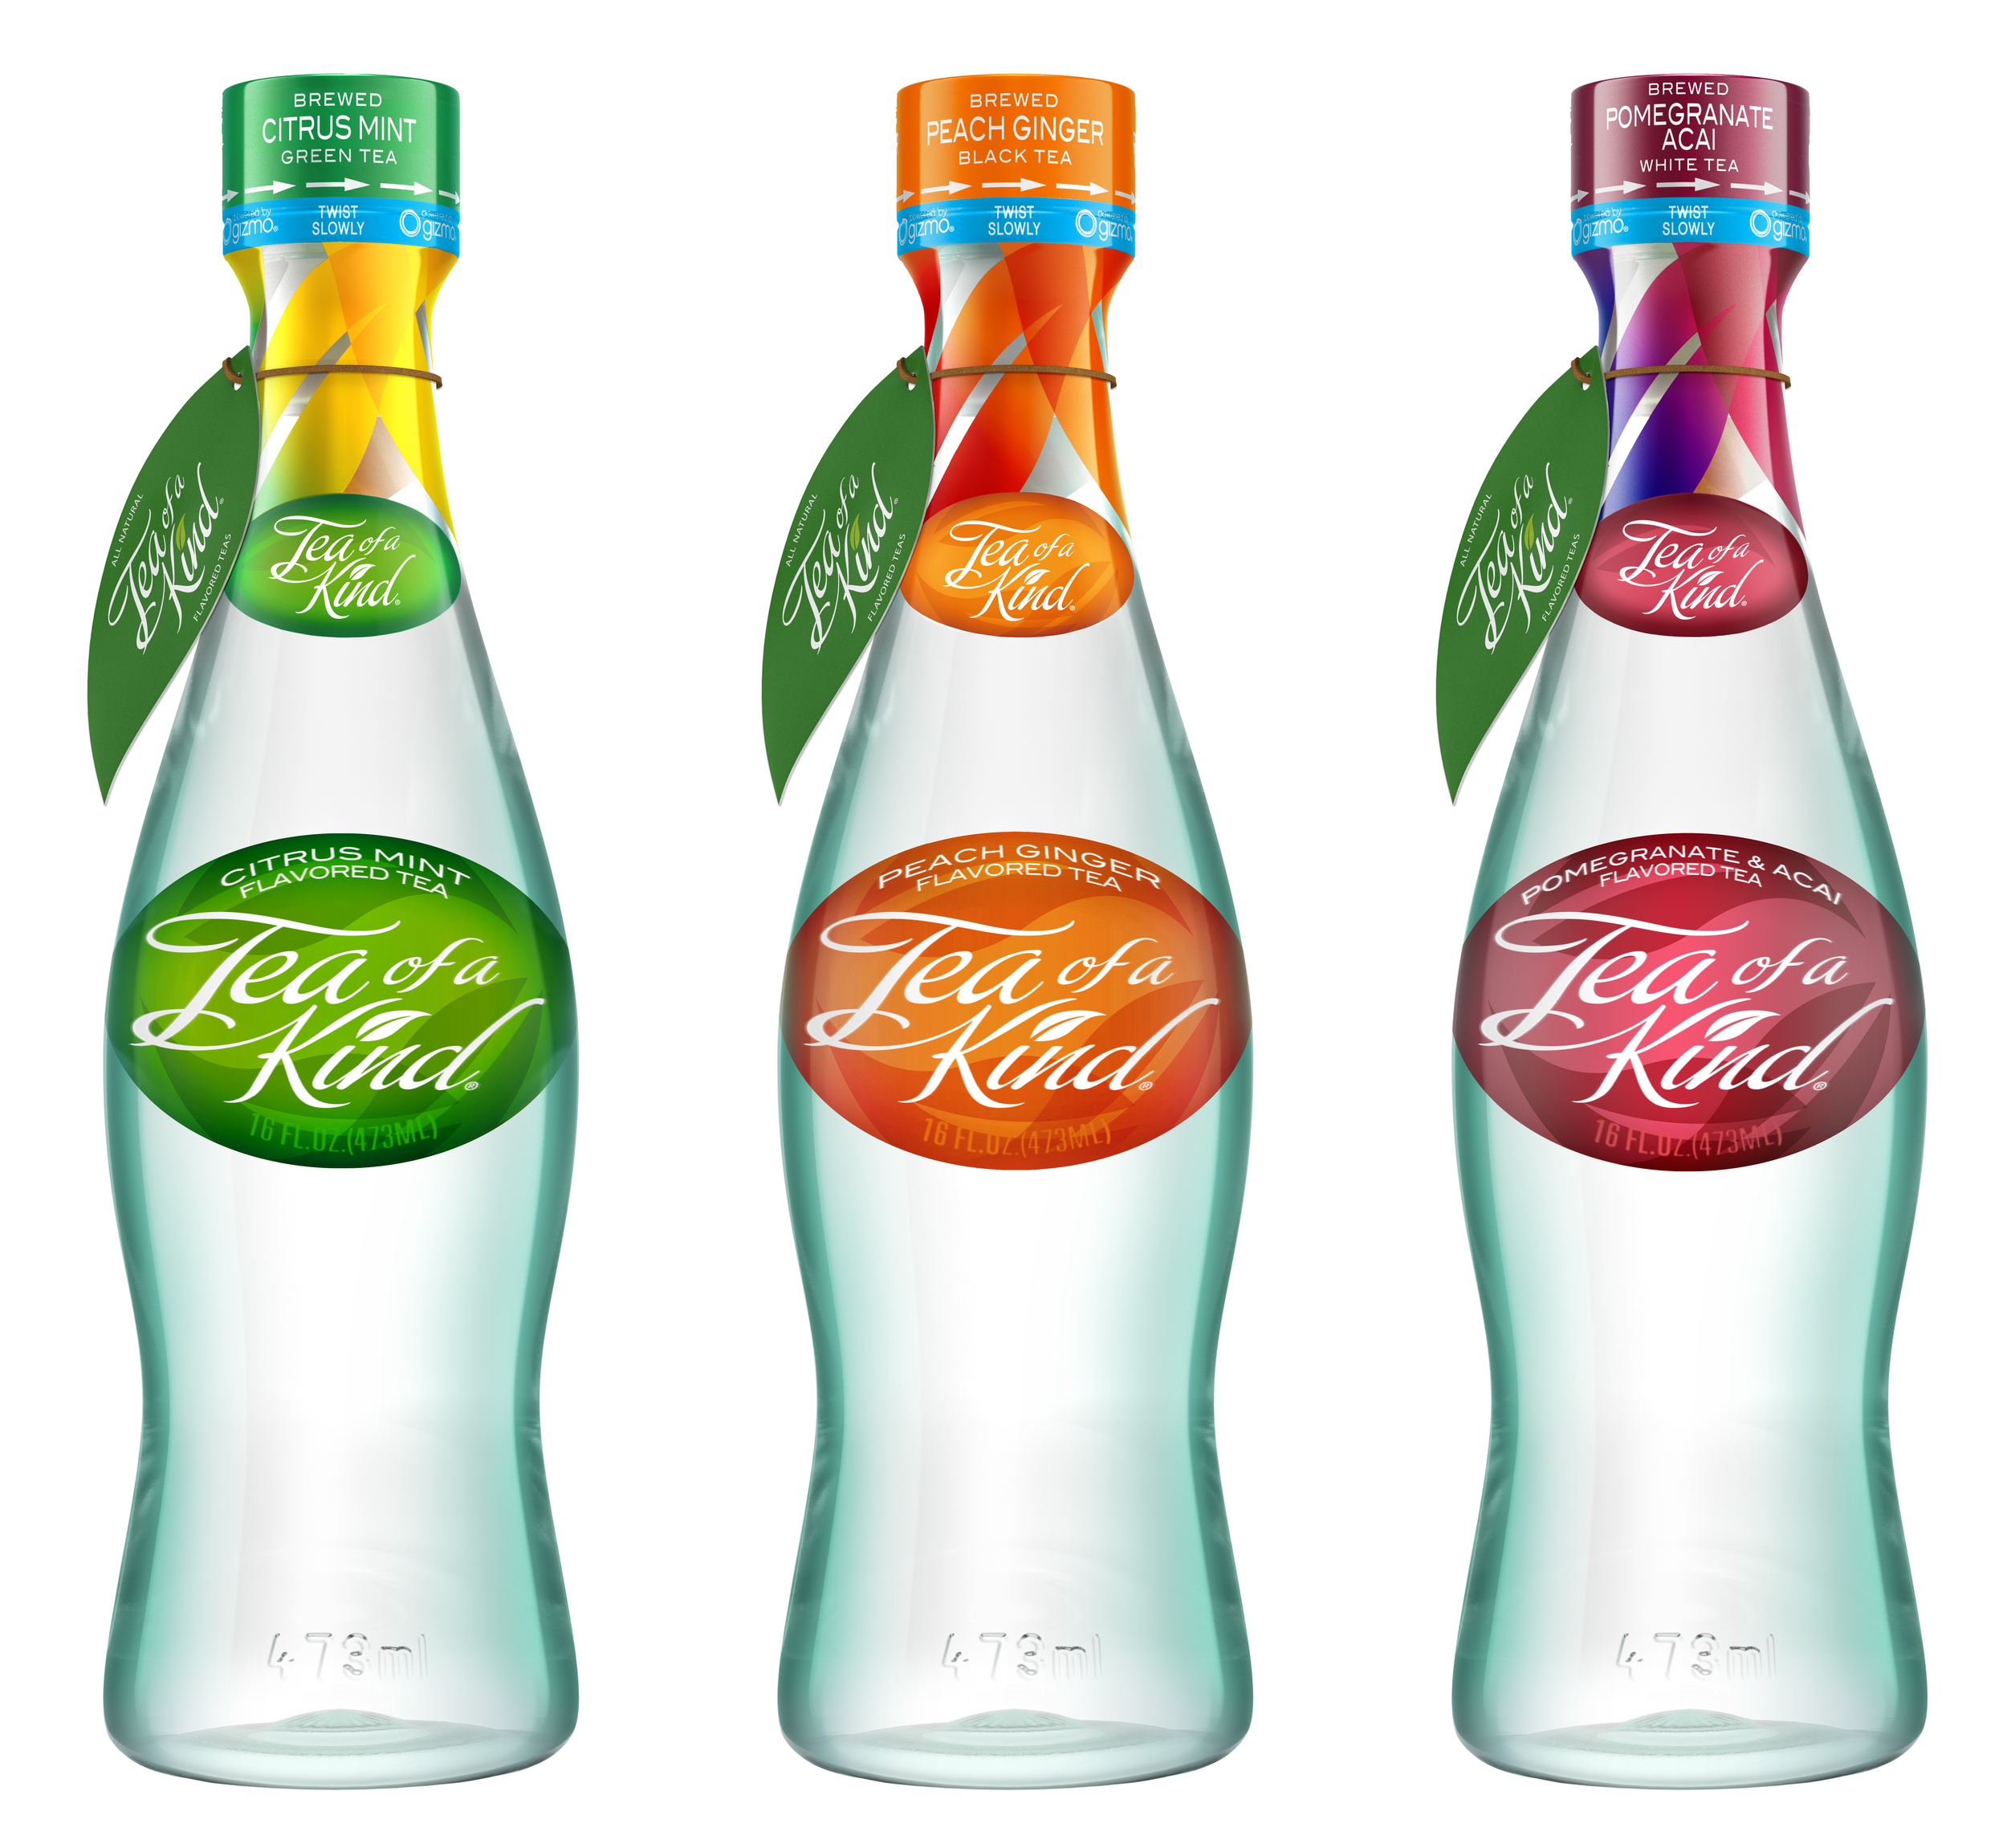  Client: Trinity Branding / Tea of a Kind  Assignment: Place Adobe Illustrator mechanical elements onto 3-D rendered bottles. 